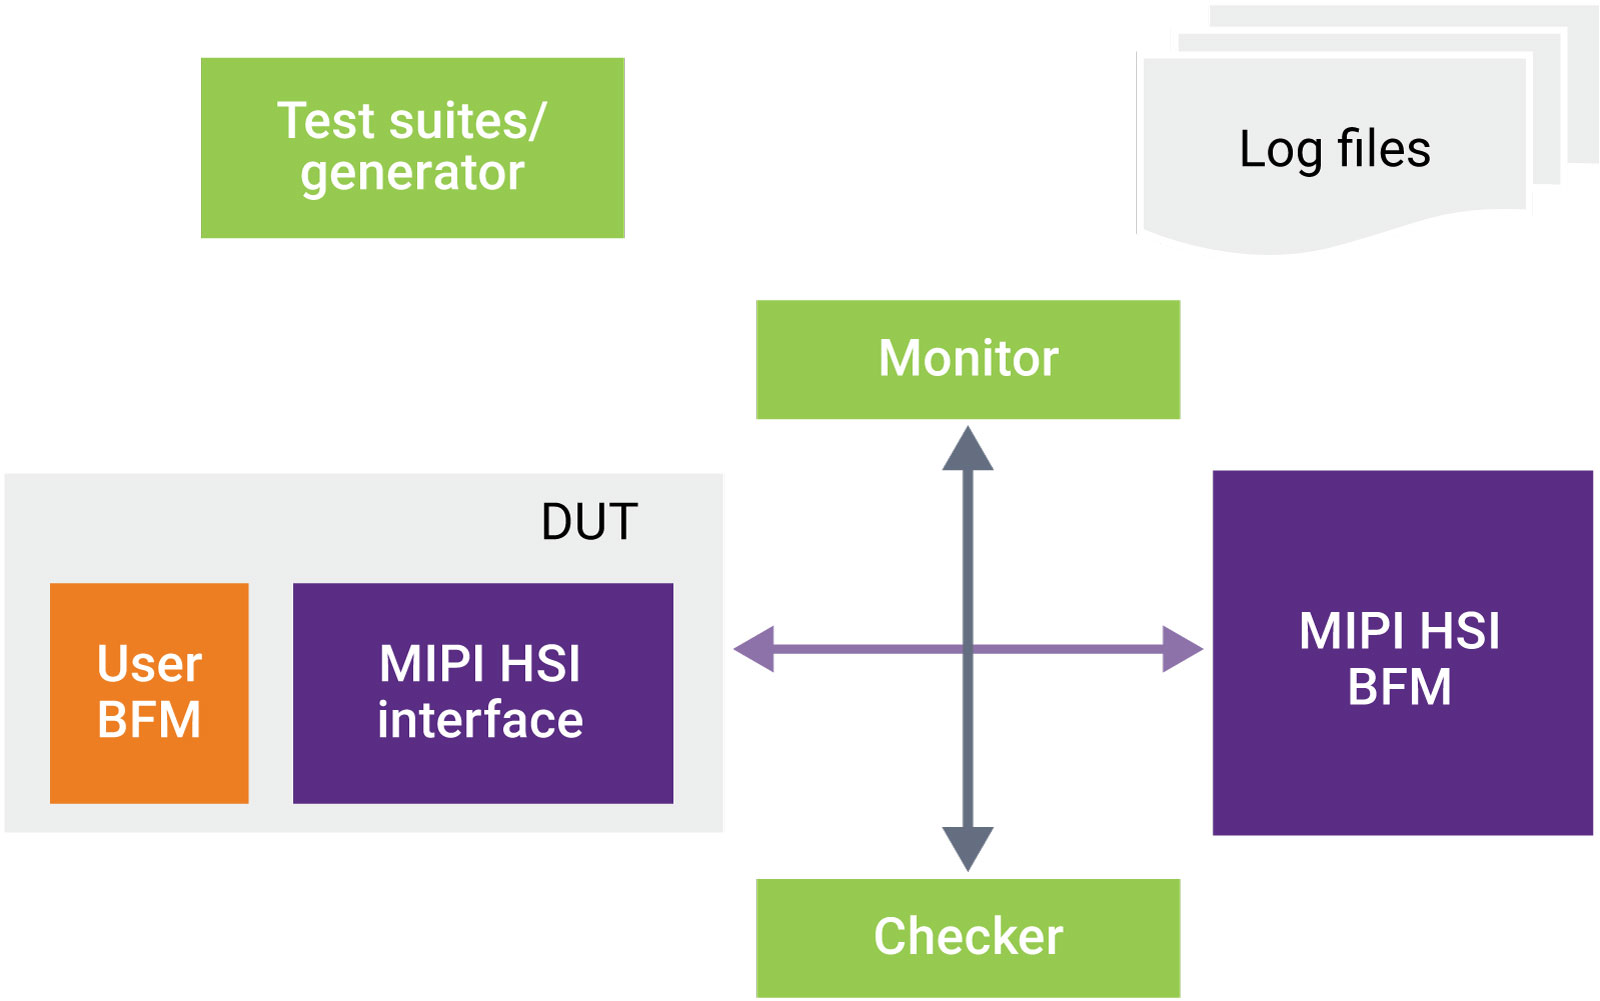 Verification IP for MIPI HSI